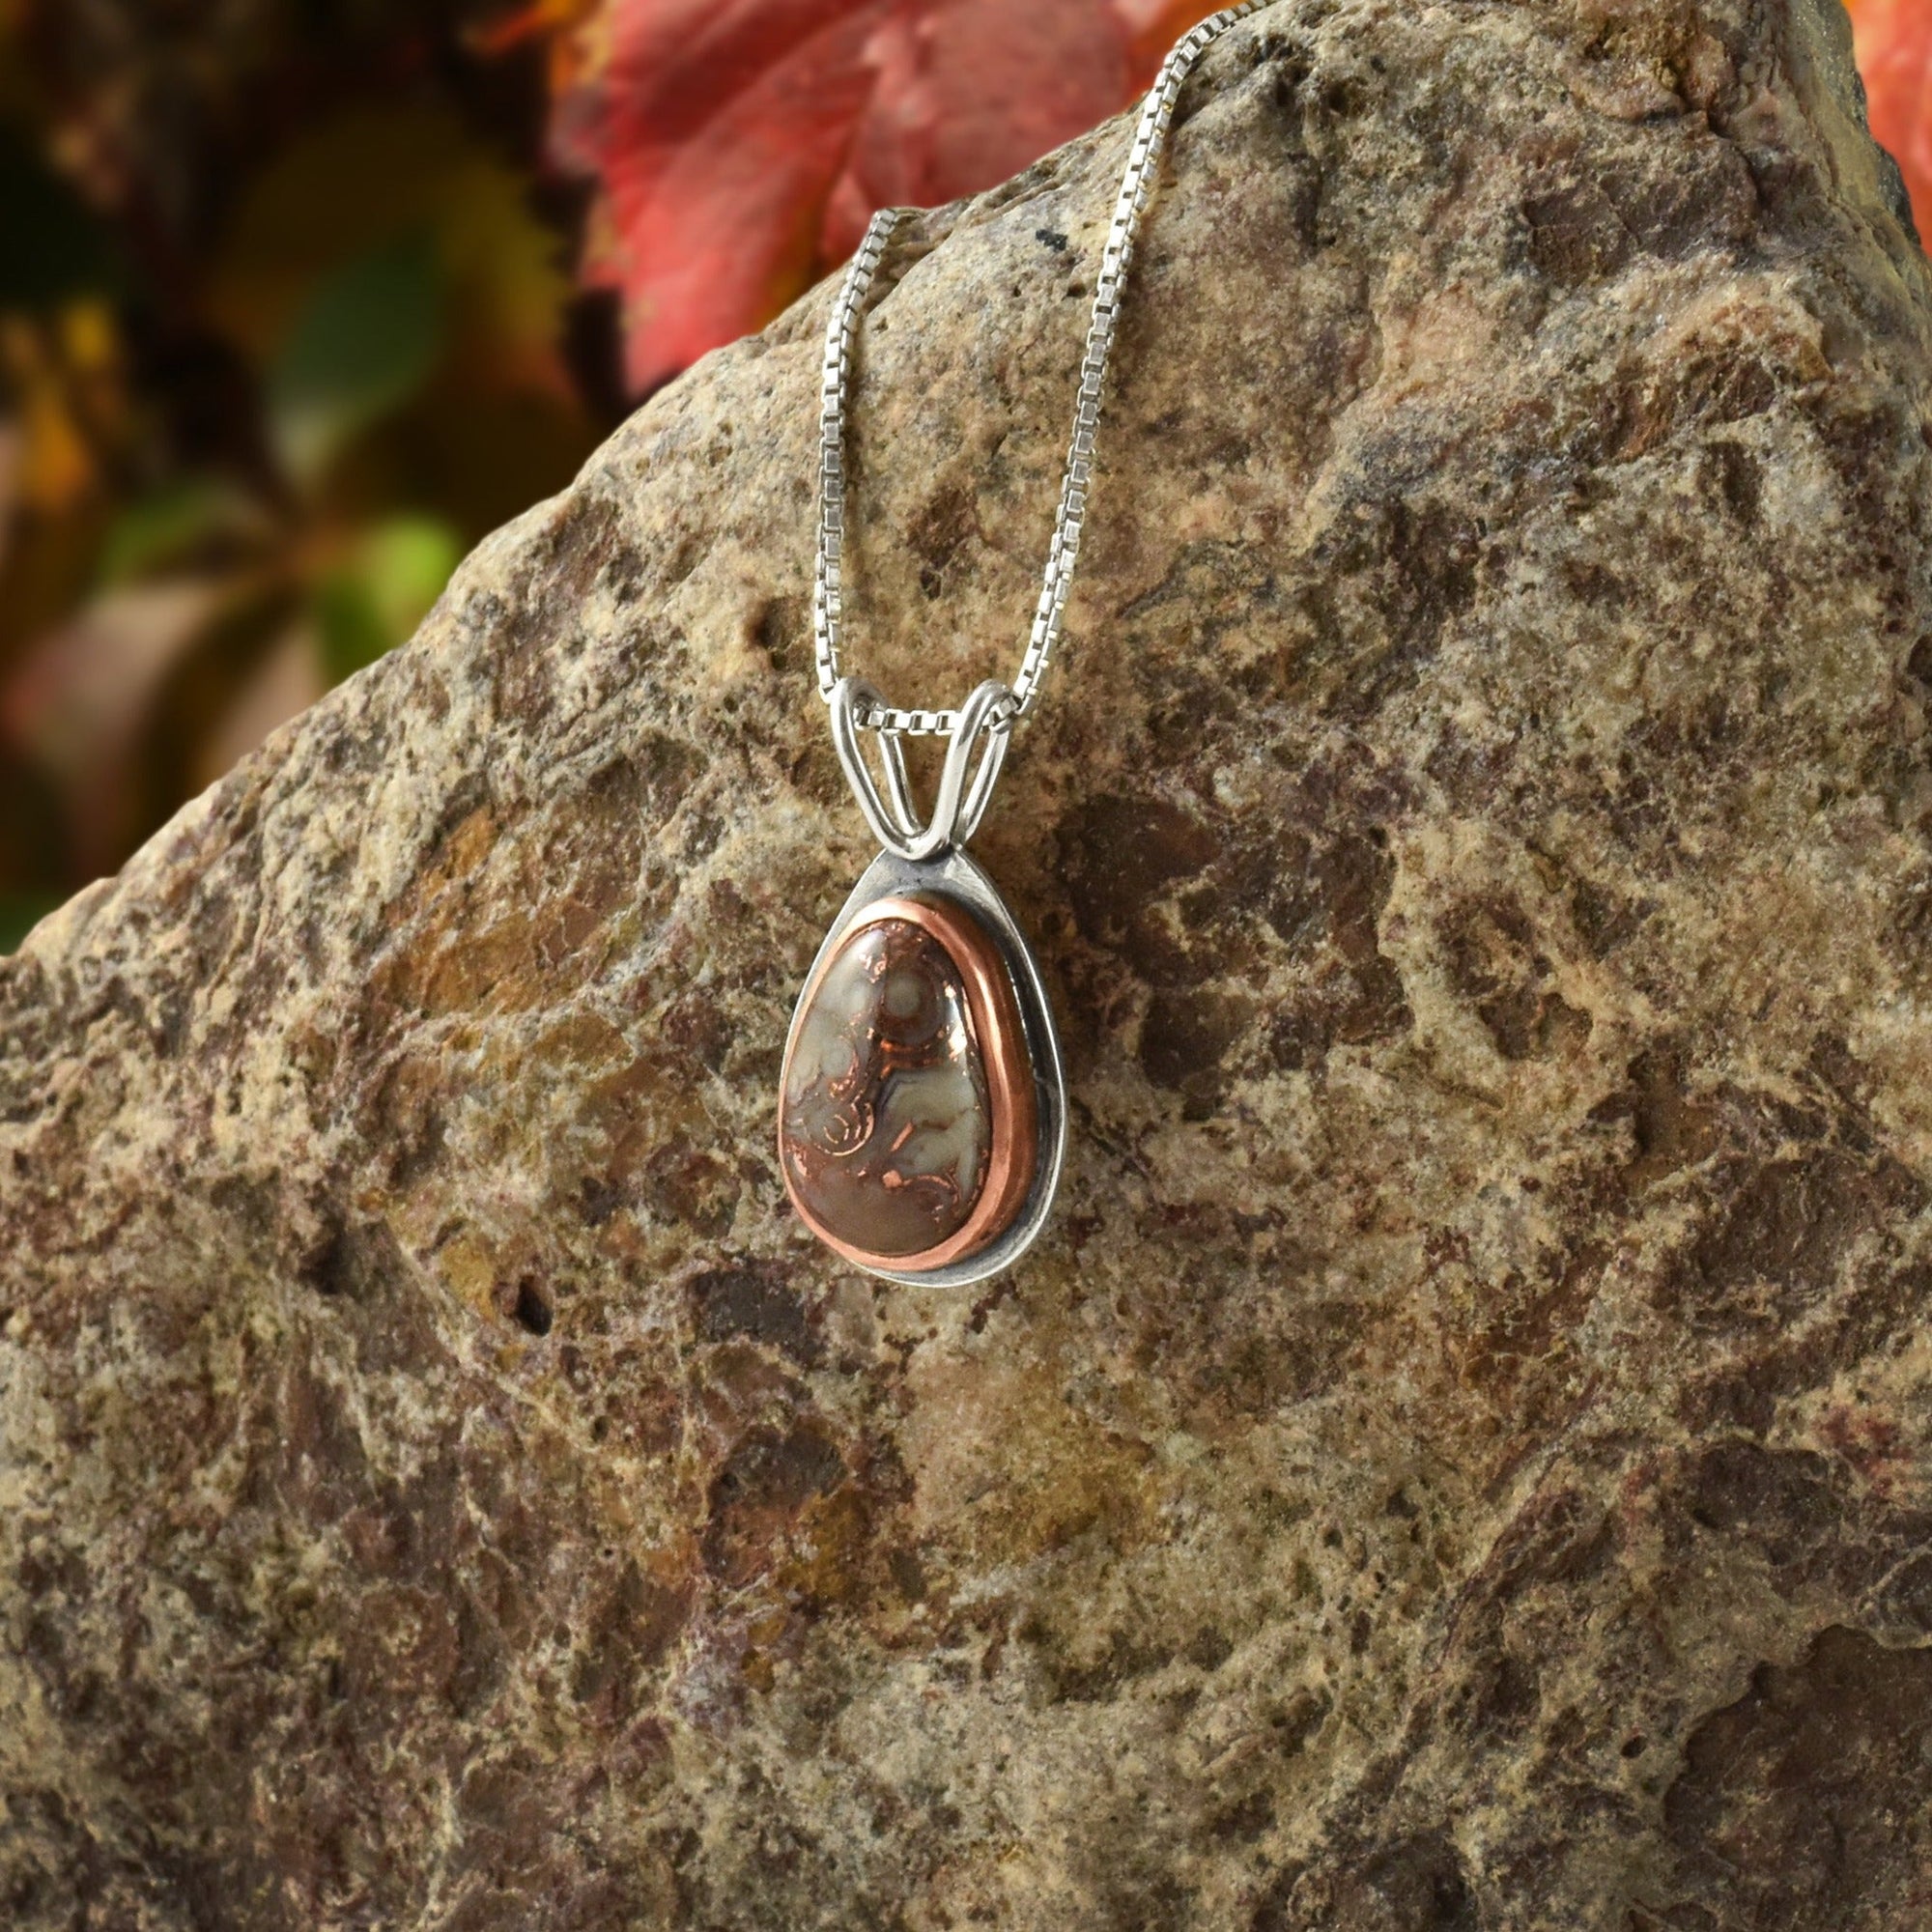 Copper Set Lake Superior Copper Agate Drop Pendant No. 4 - Mixed Metal Pendant - handmade by Beth Millner Jewelry